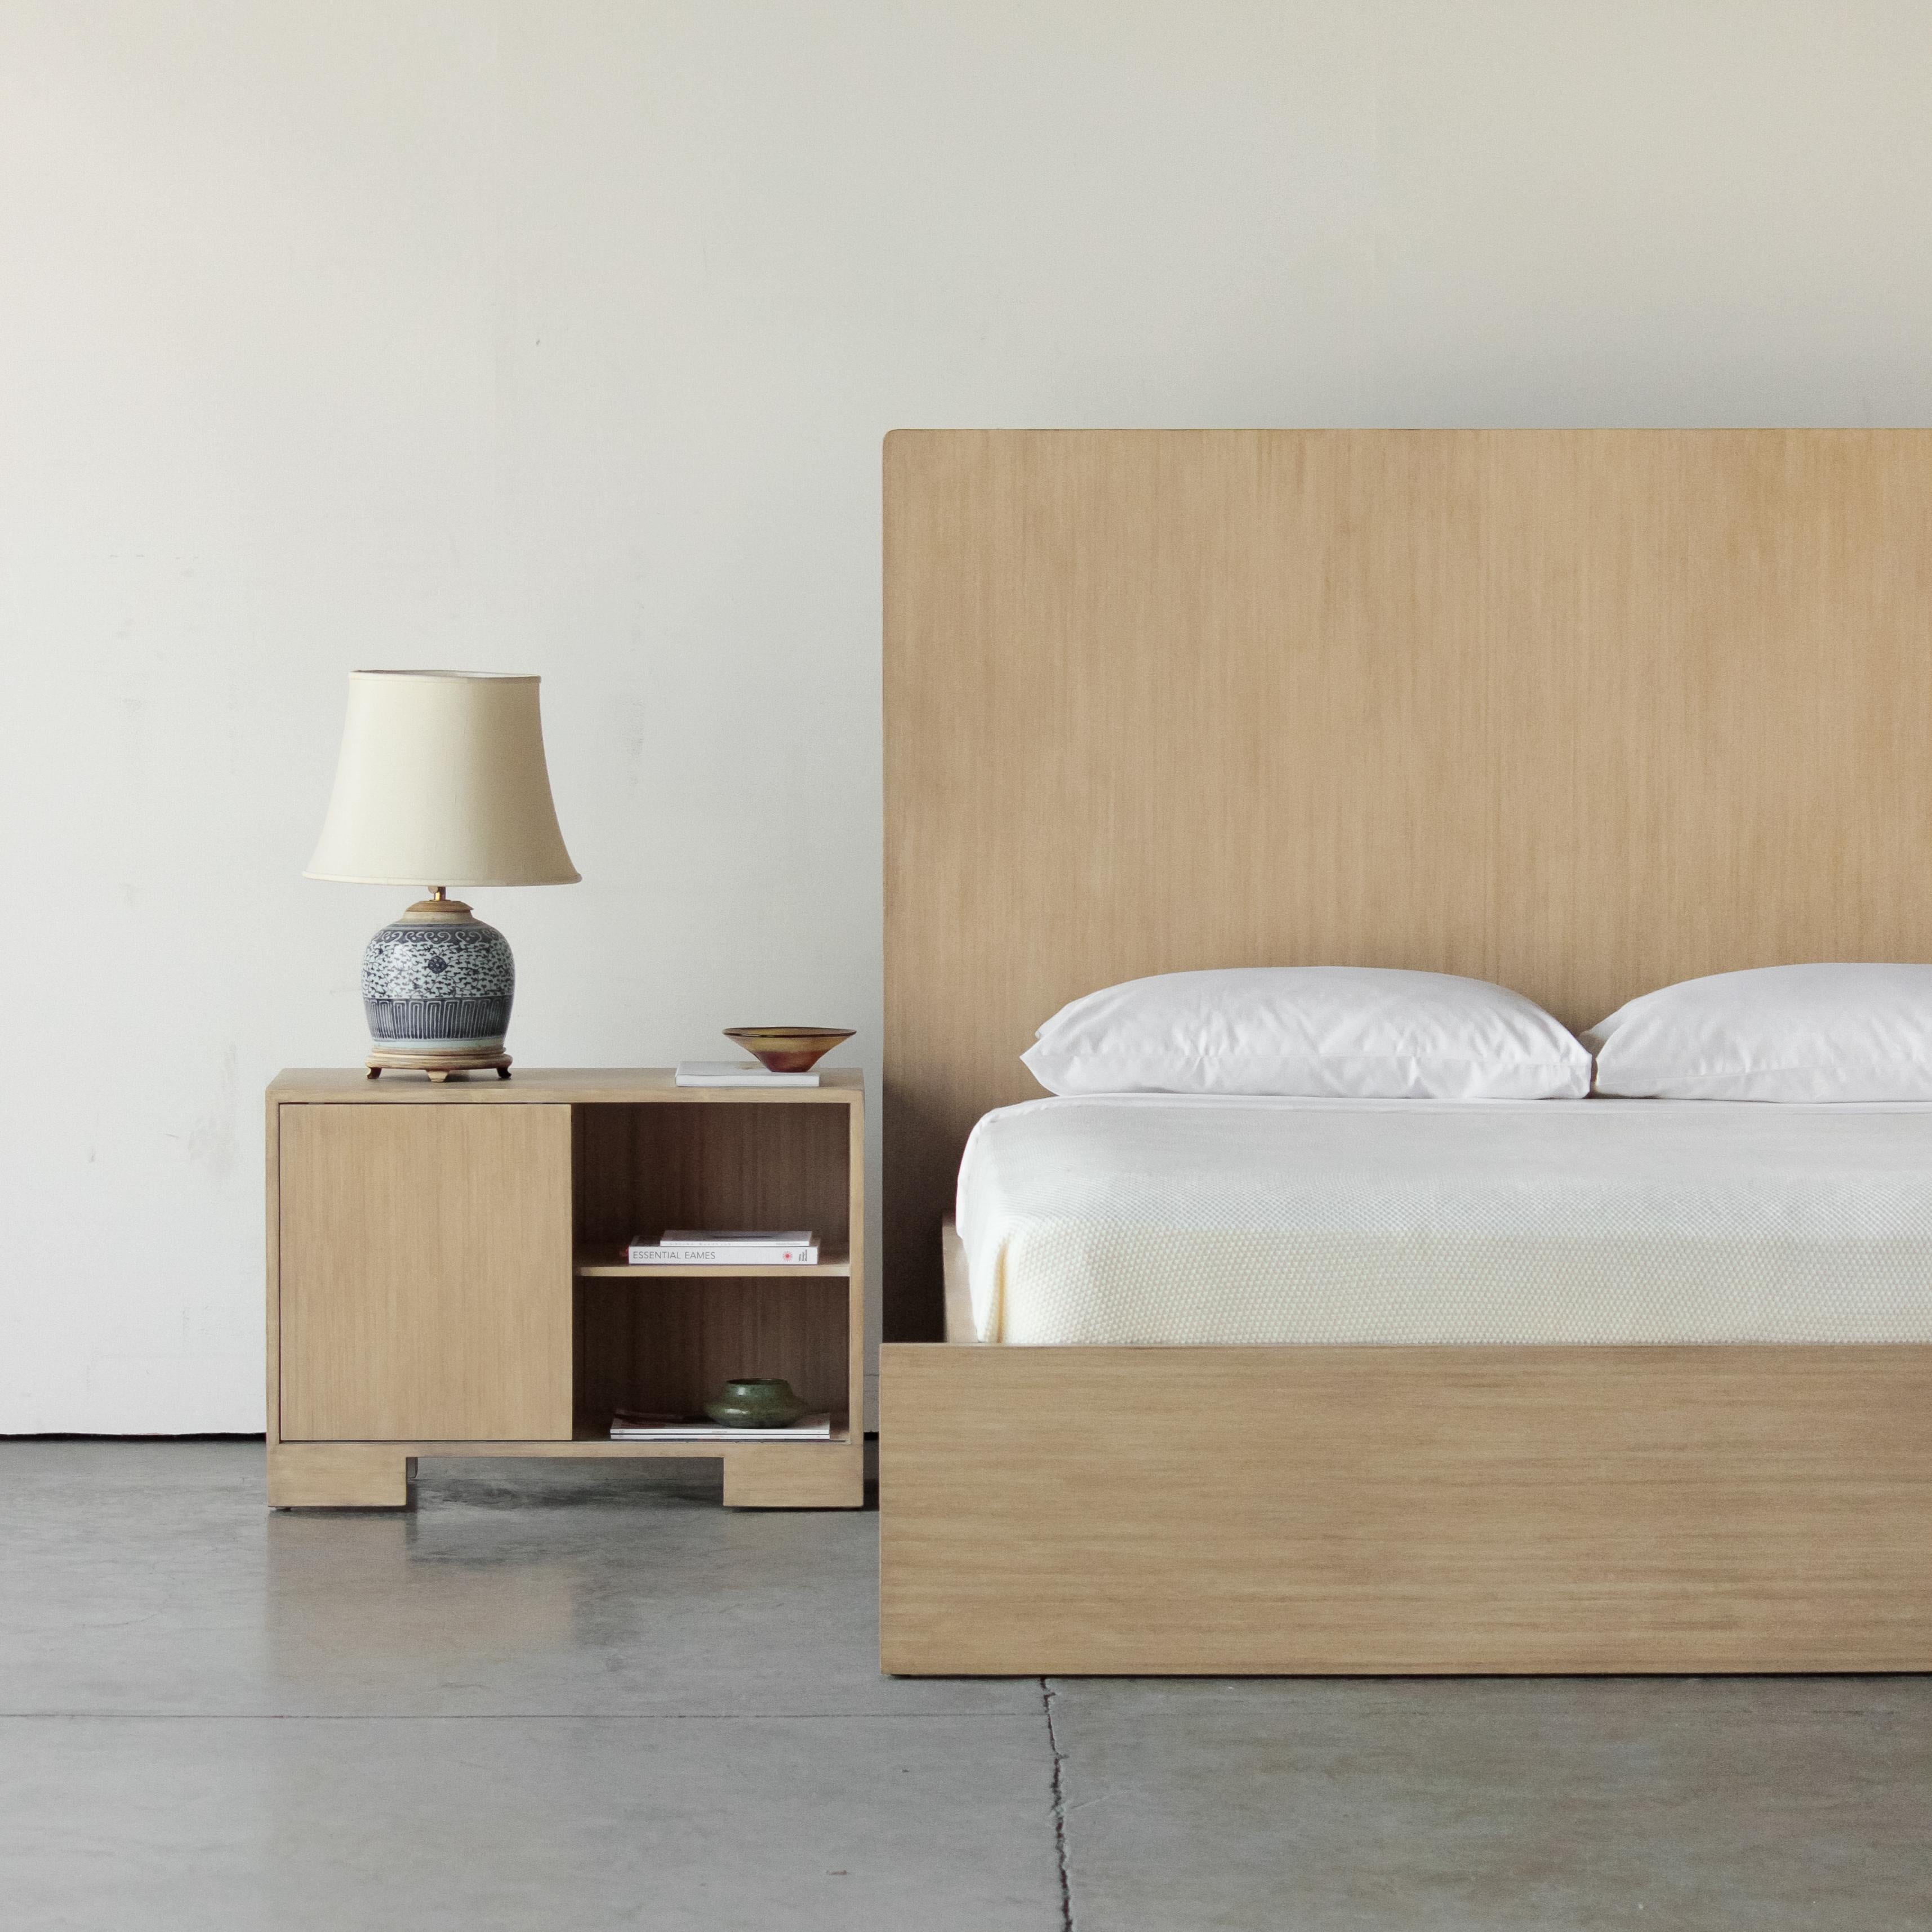 The Fen Plank Bed offers clean lines and a minimal silhouette. Planks of solid bamboo are joined together to create a tranquil and restful bedroom centerpiece. Available in Queen and King sizes.

The Fen Collection is a celebration of cultural